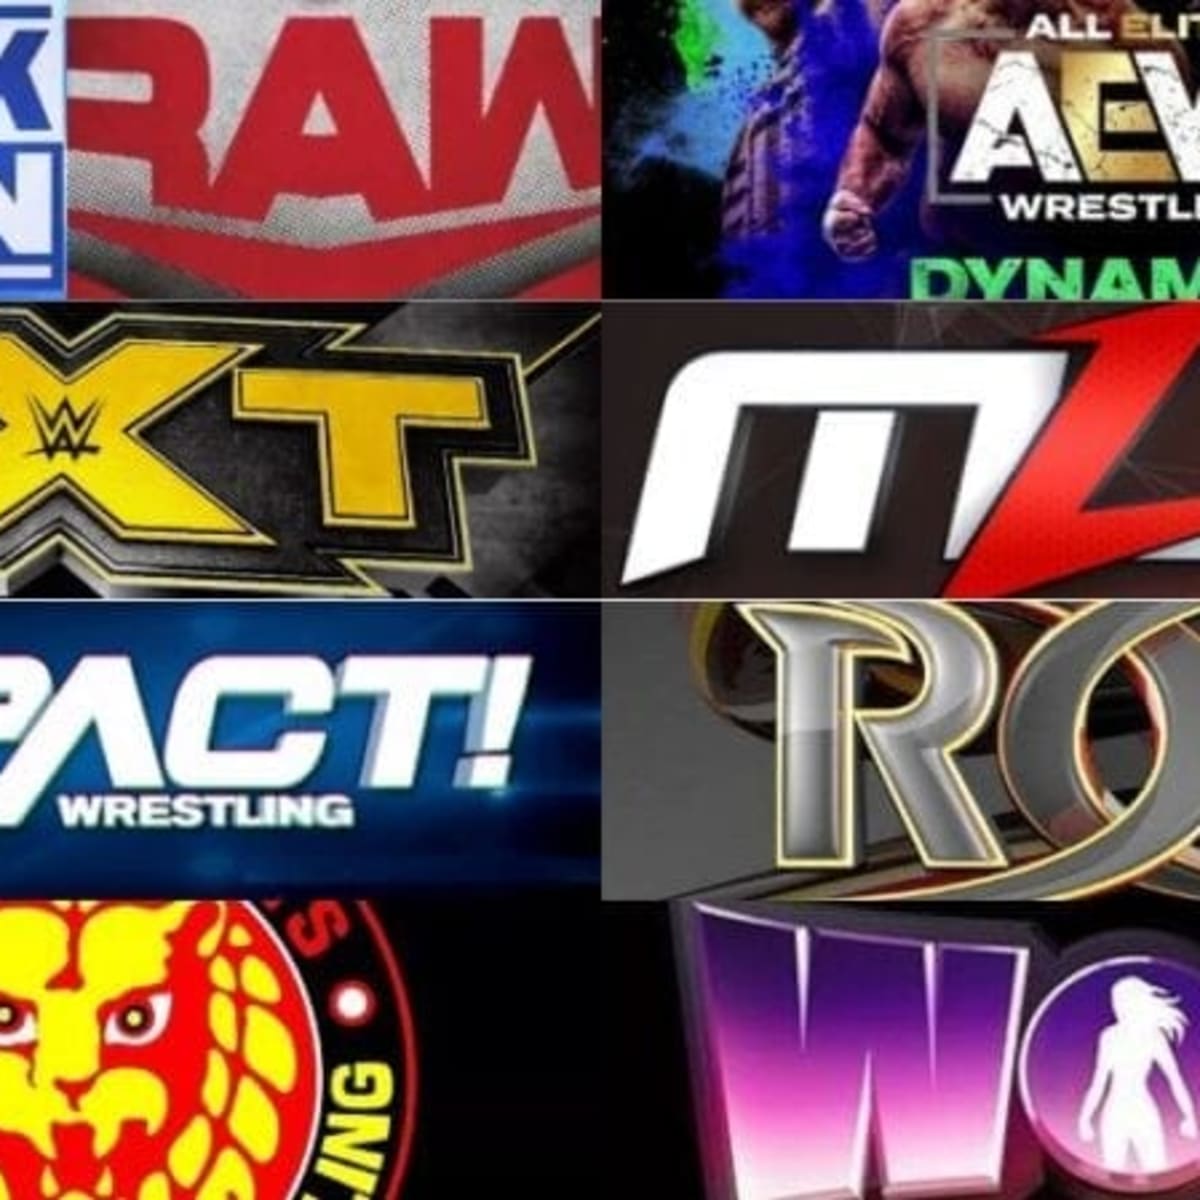 WWE, AEW, NXT, Impact, MLW, NJPW, WOW - complete guide to all wrestling on national TV this week